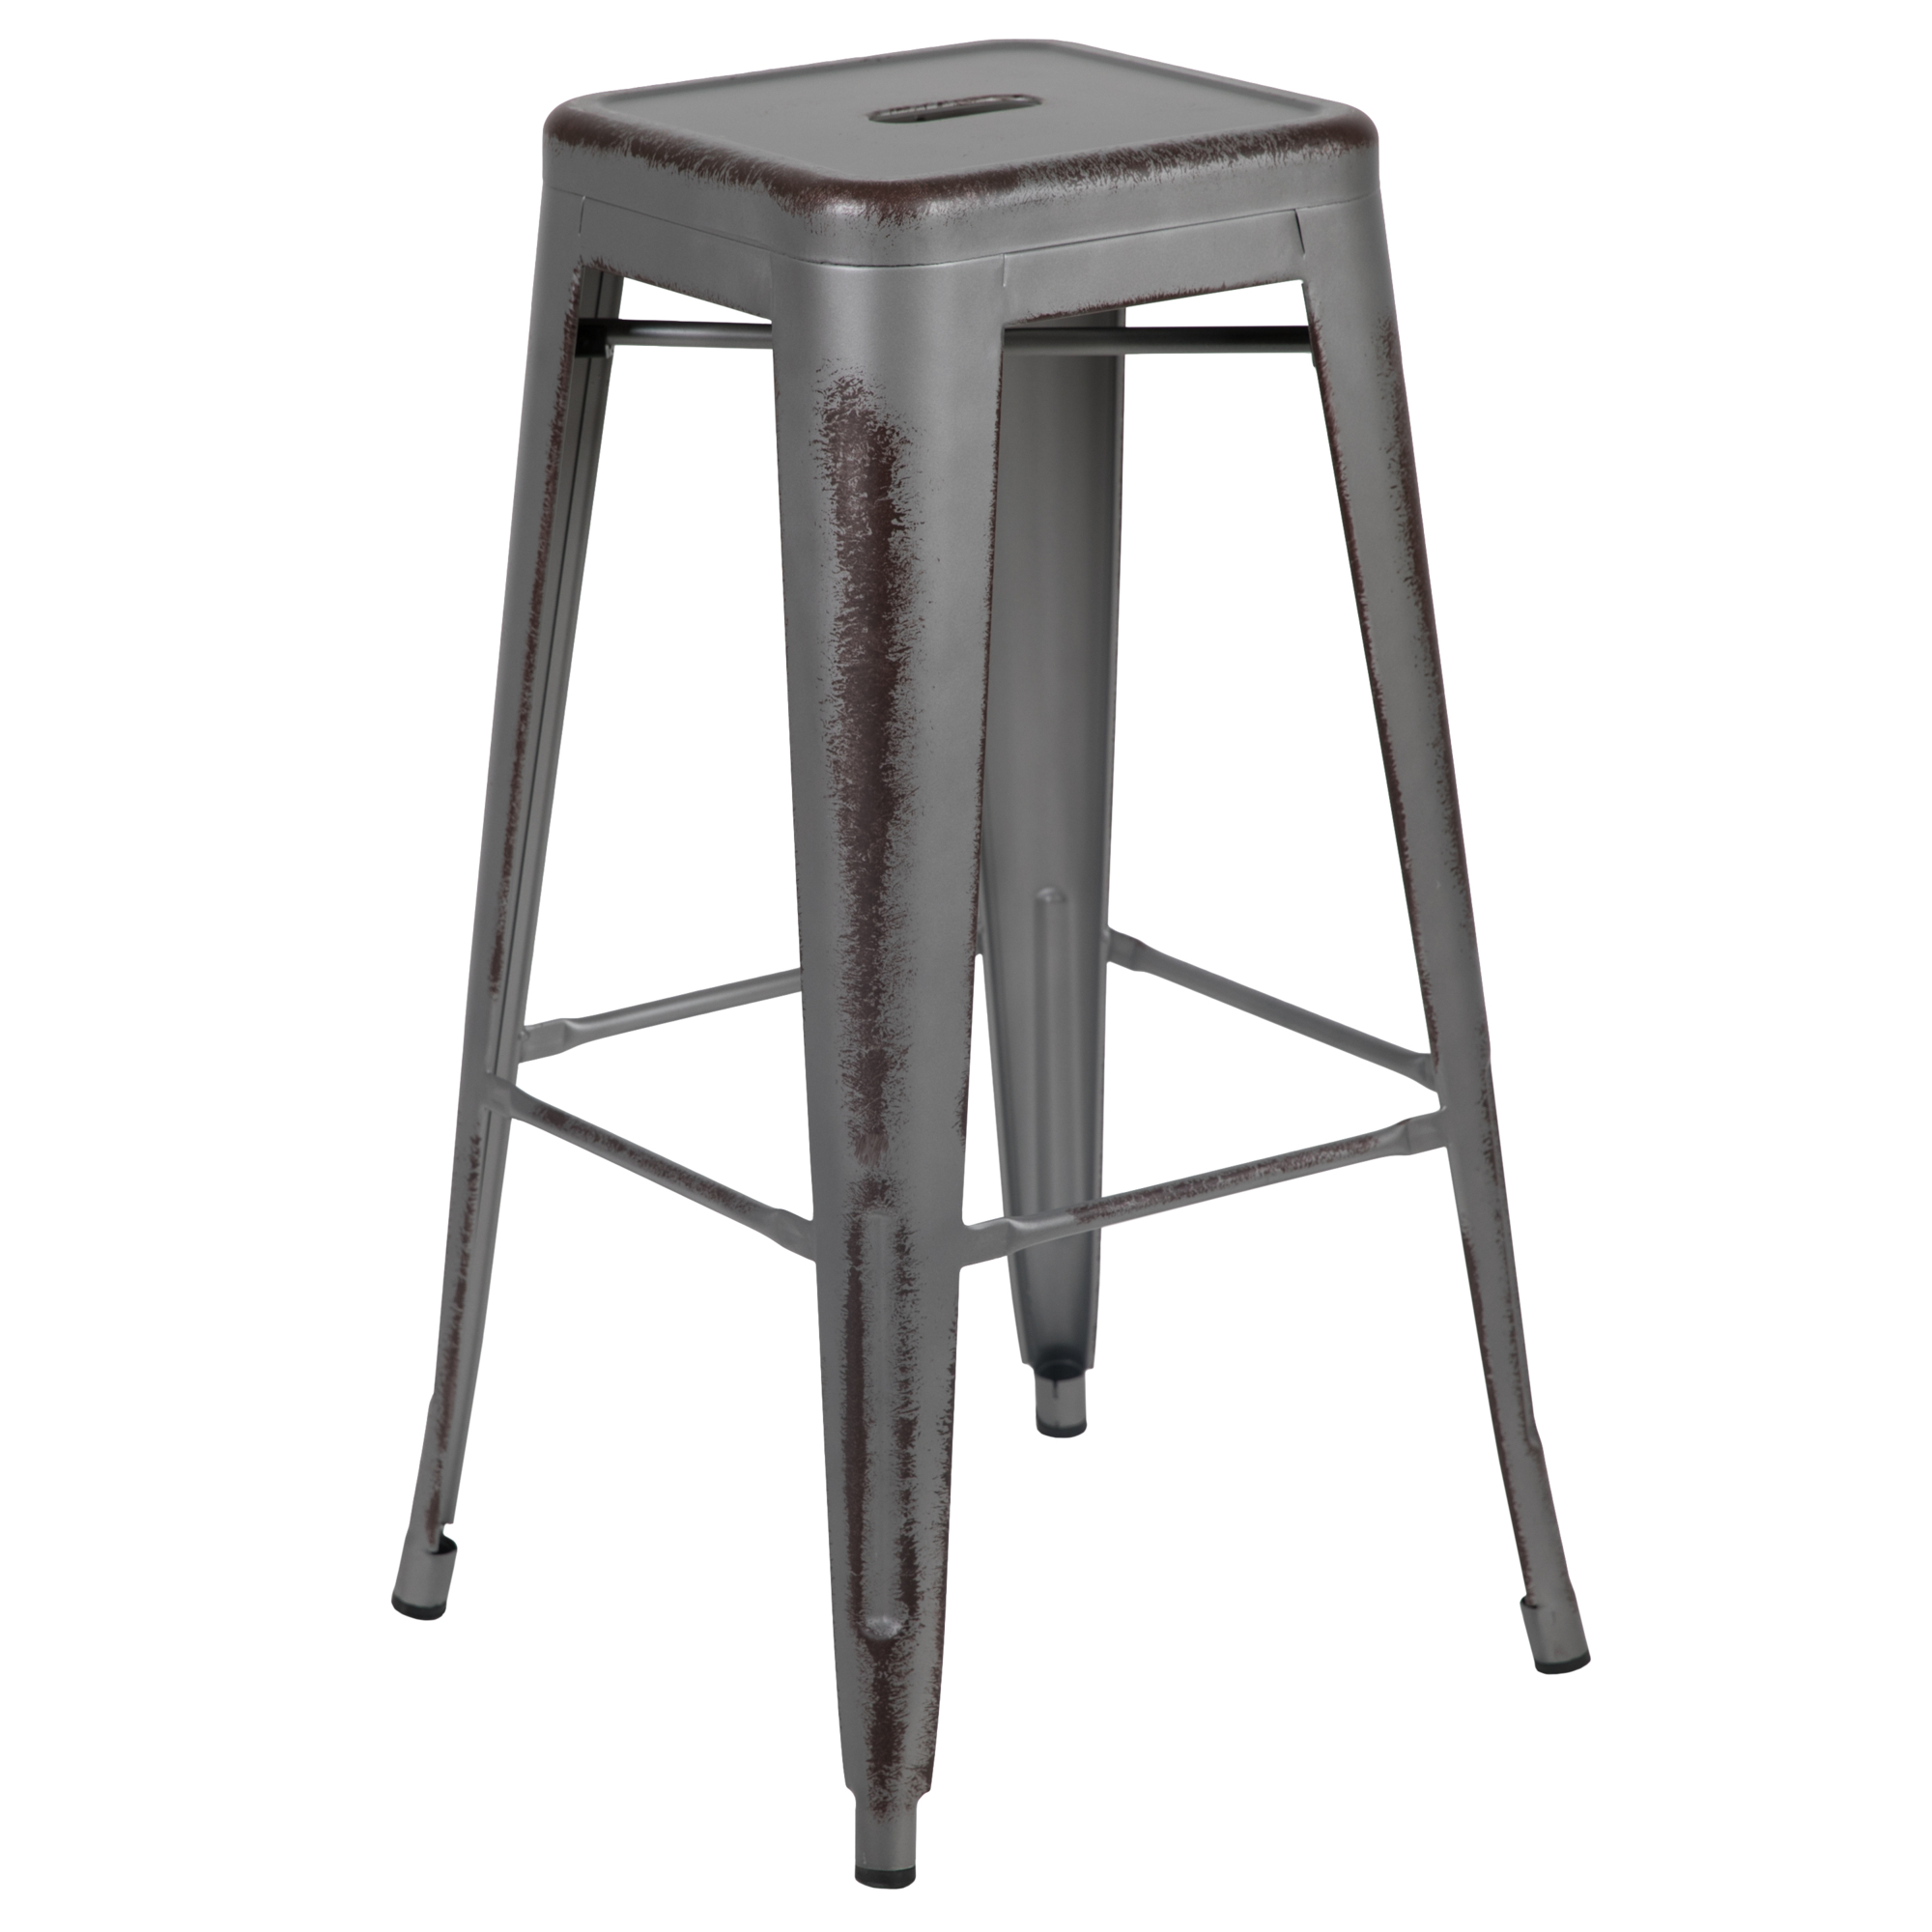 Flash Furniture, 30Inch H Backless Distressed Silver Metal Barstool, Primary Color Gray, Included (qty.) 1, Model ETBT350330SIL